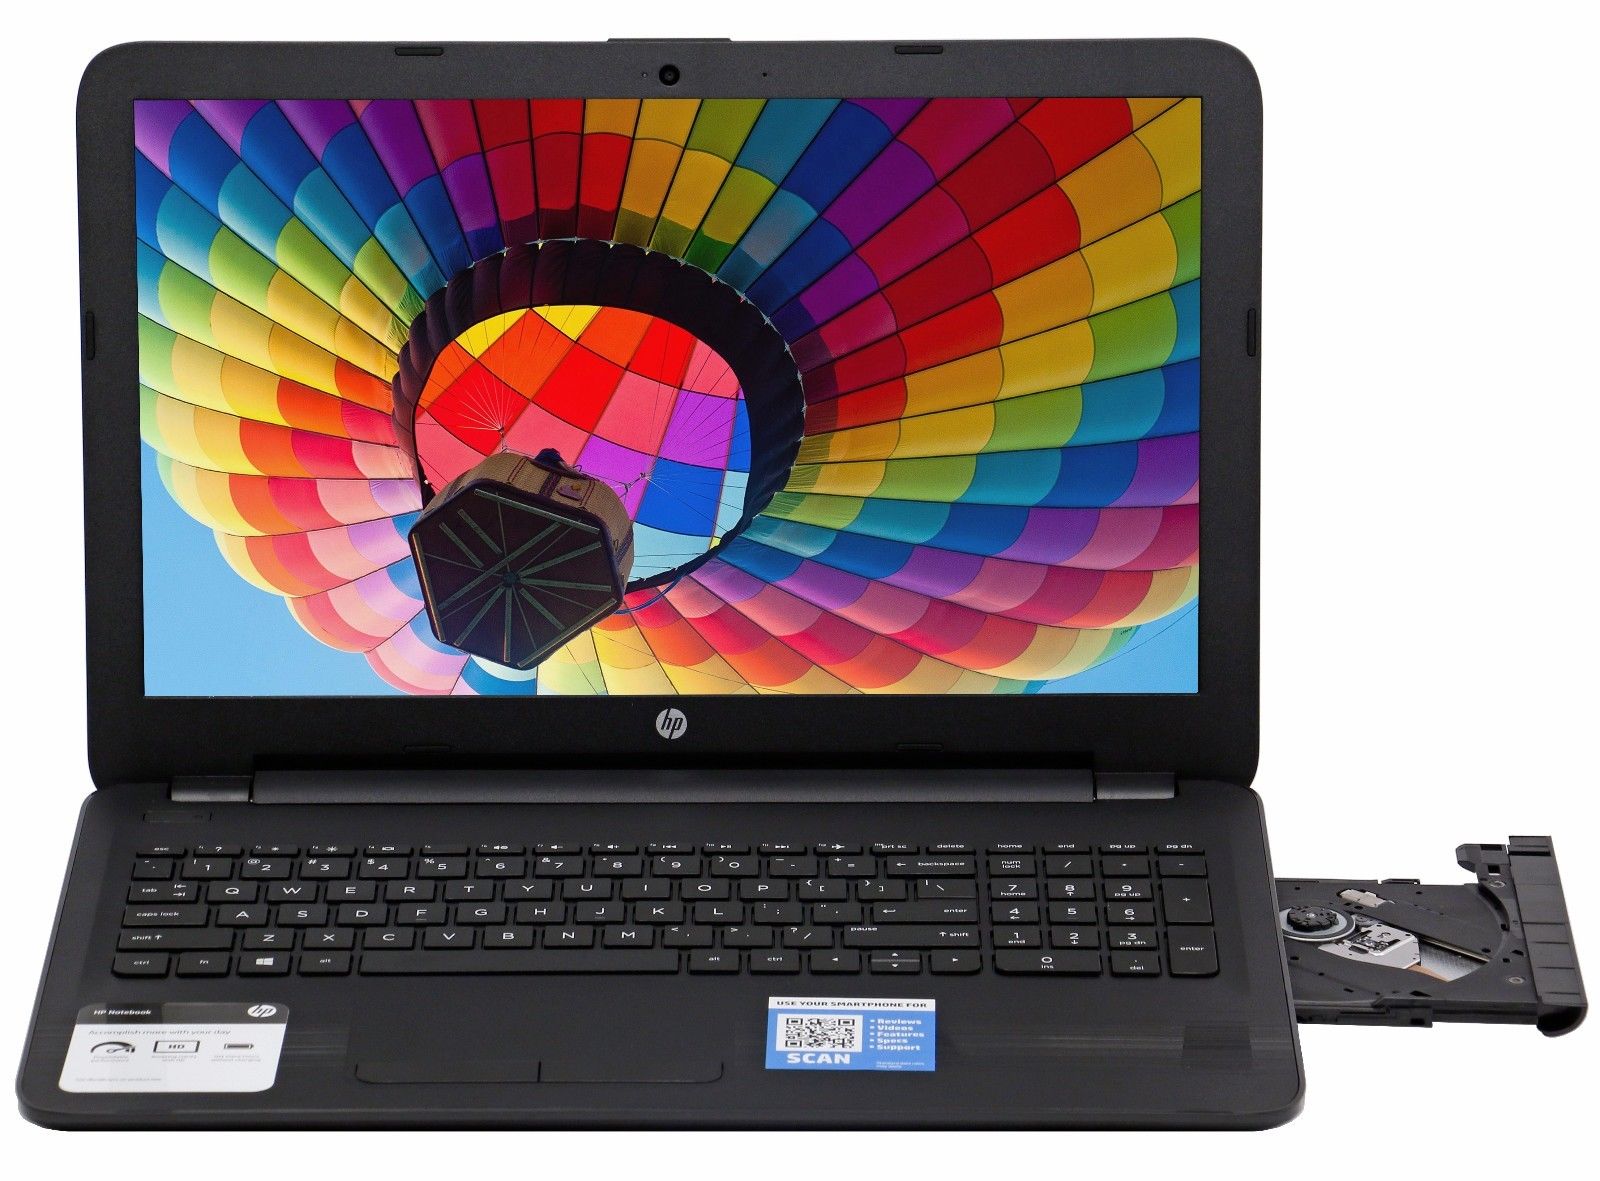 HP 15.6″ 4gb 500gb Quad Core Win 10 Laptop Only $219.99!